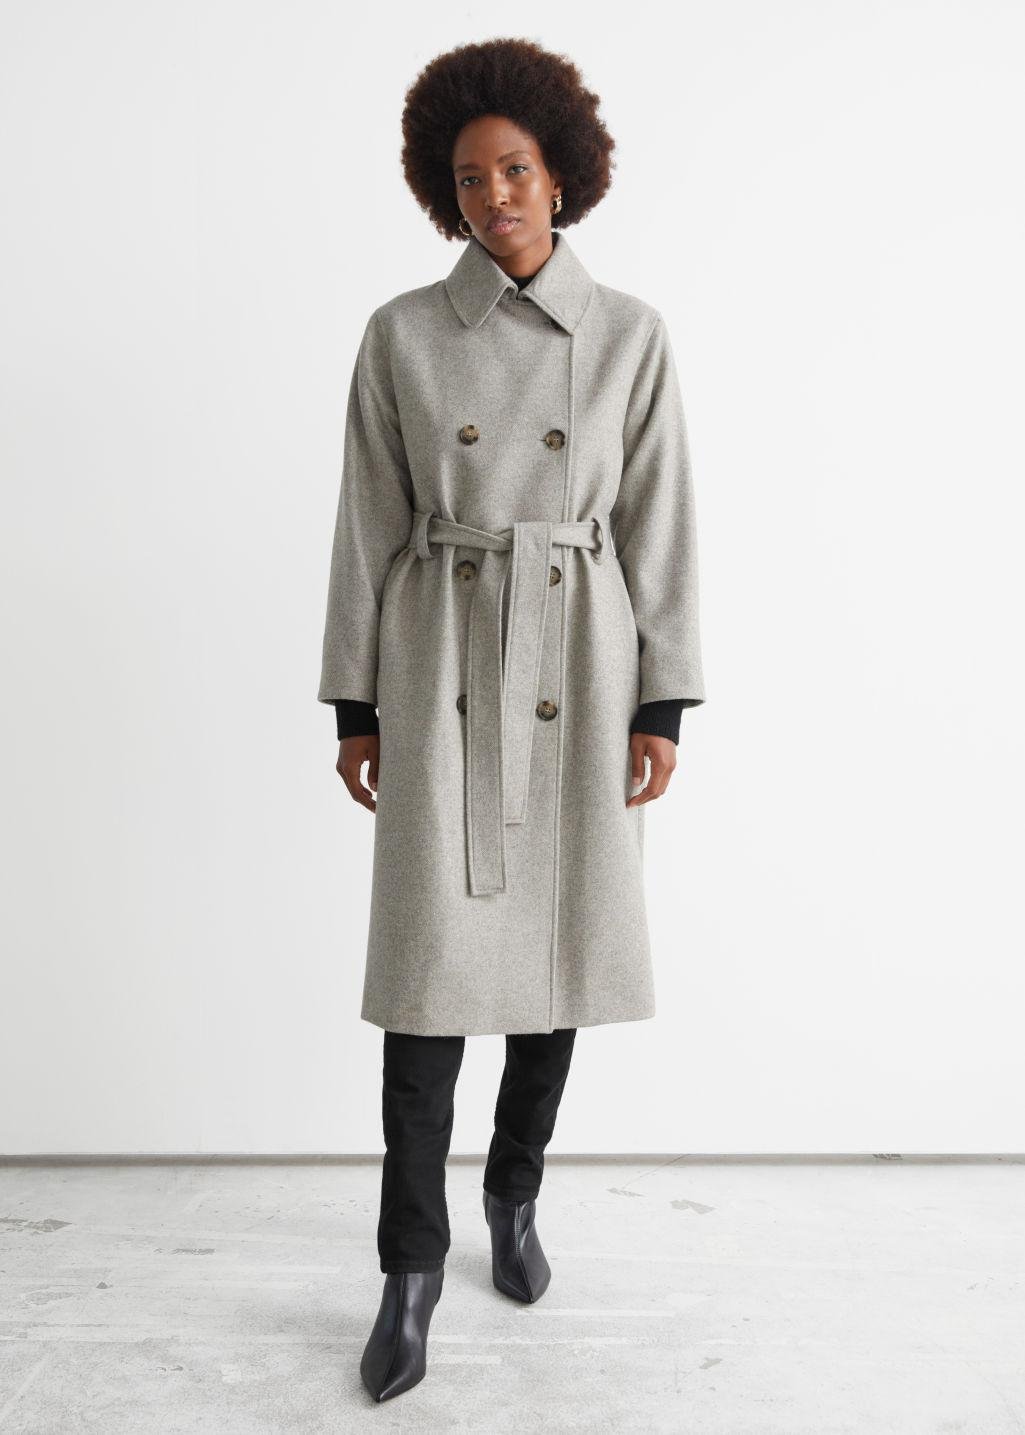 & Other Stories Relaxed Wool Blend Trench Coat in Brown | Lyst